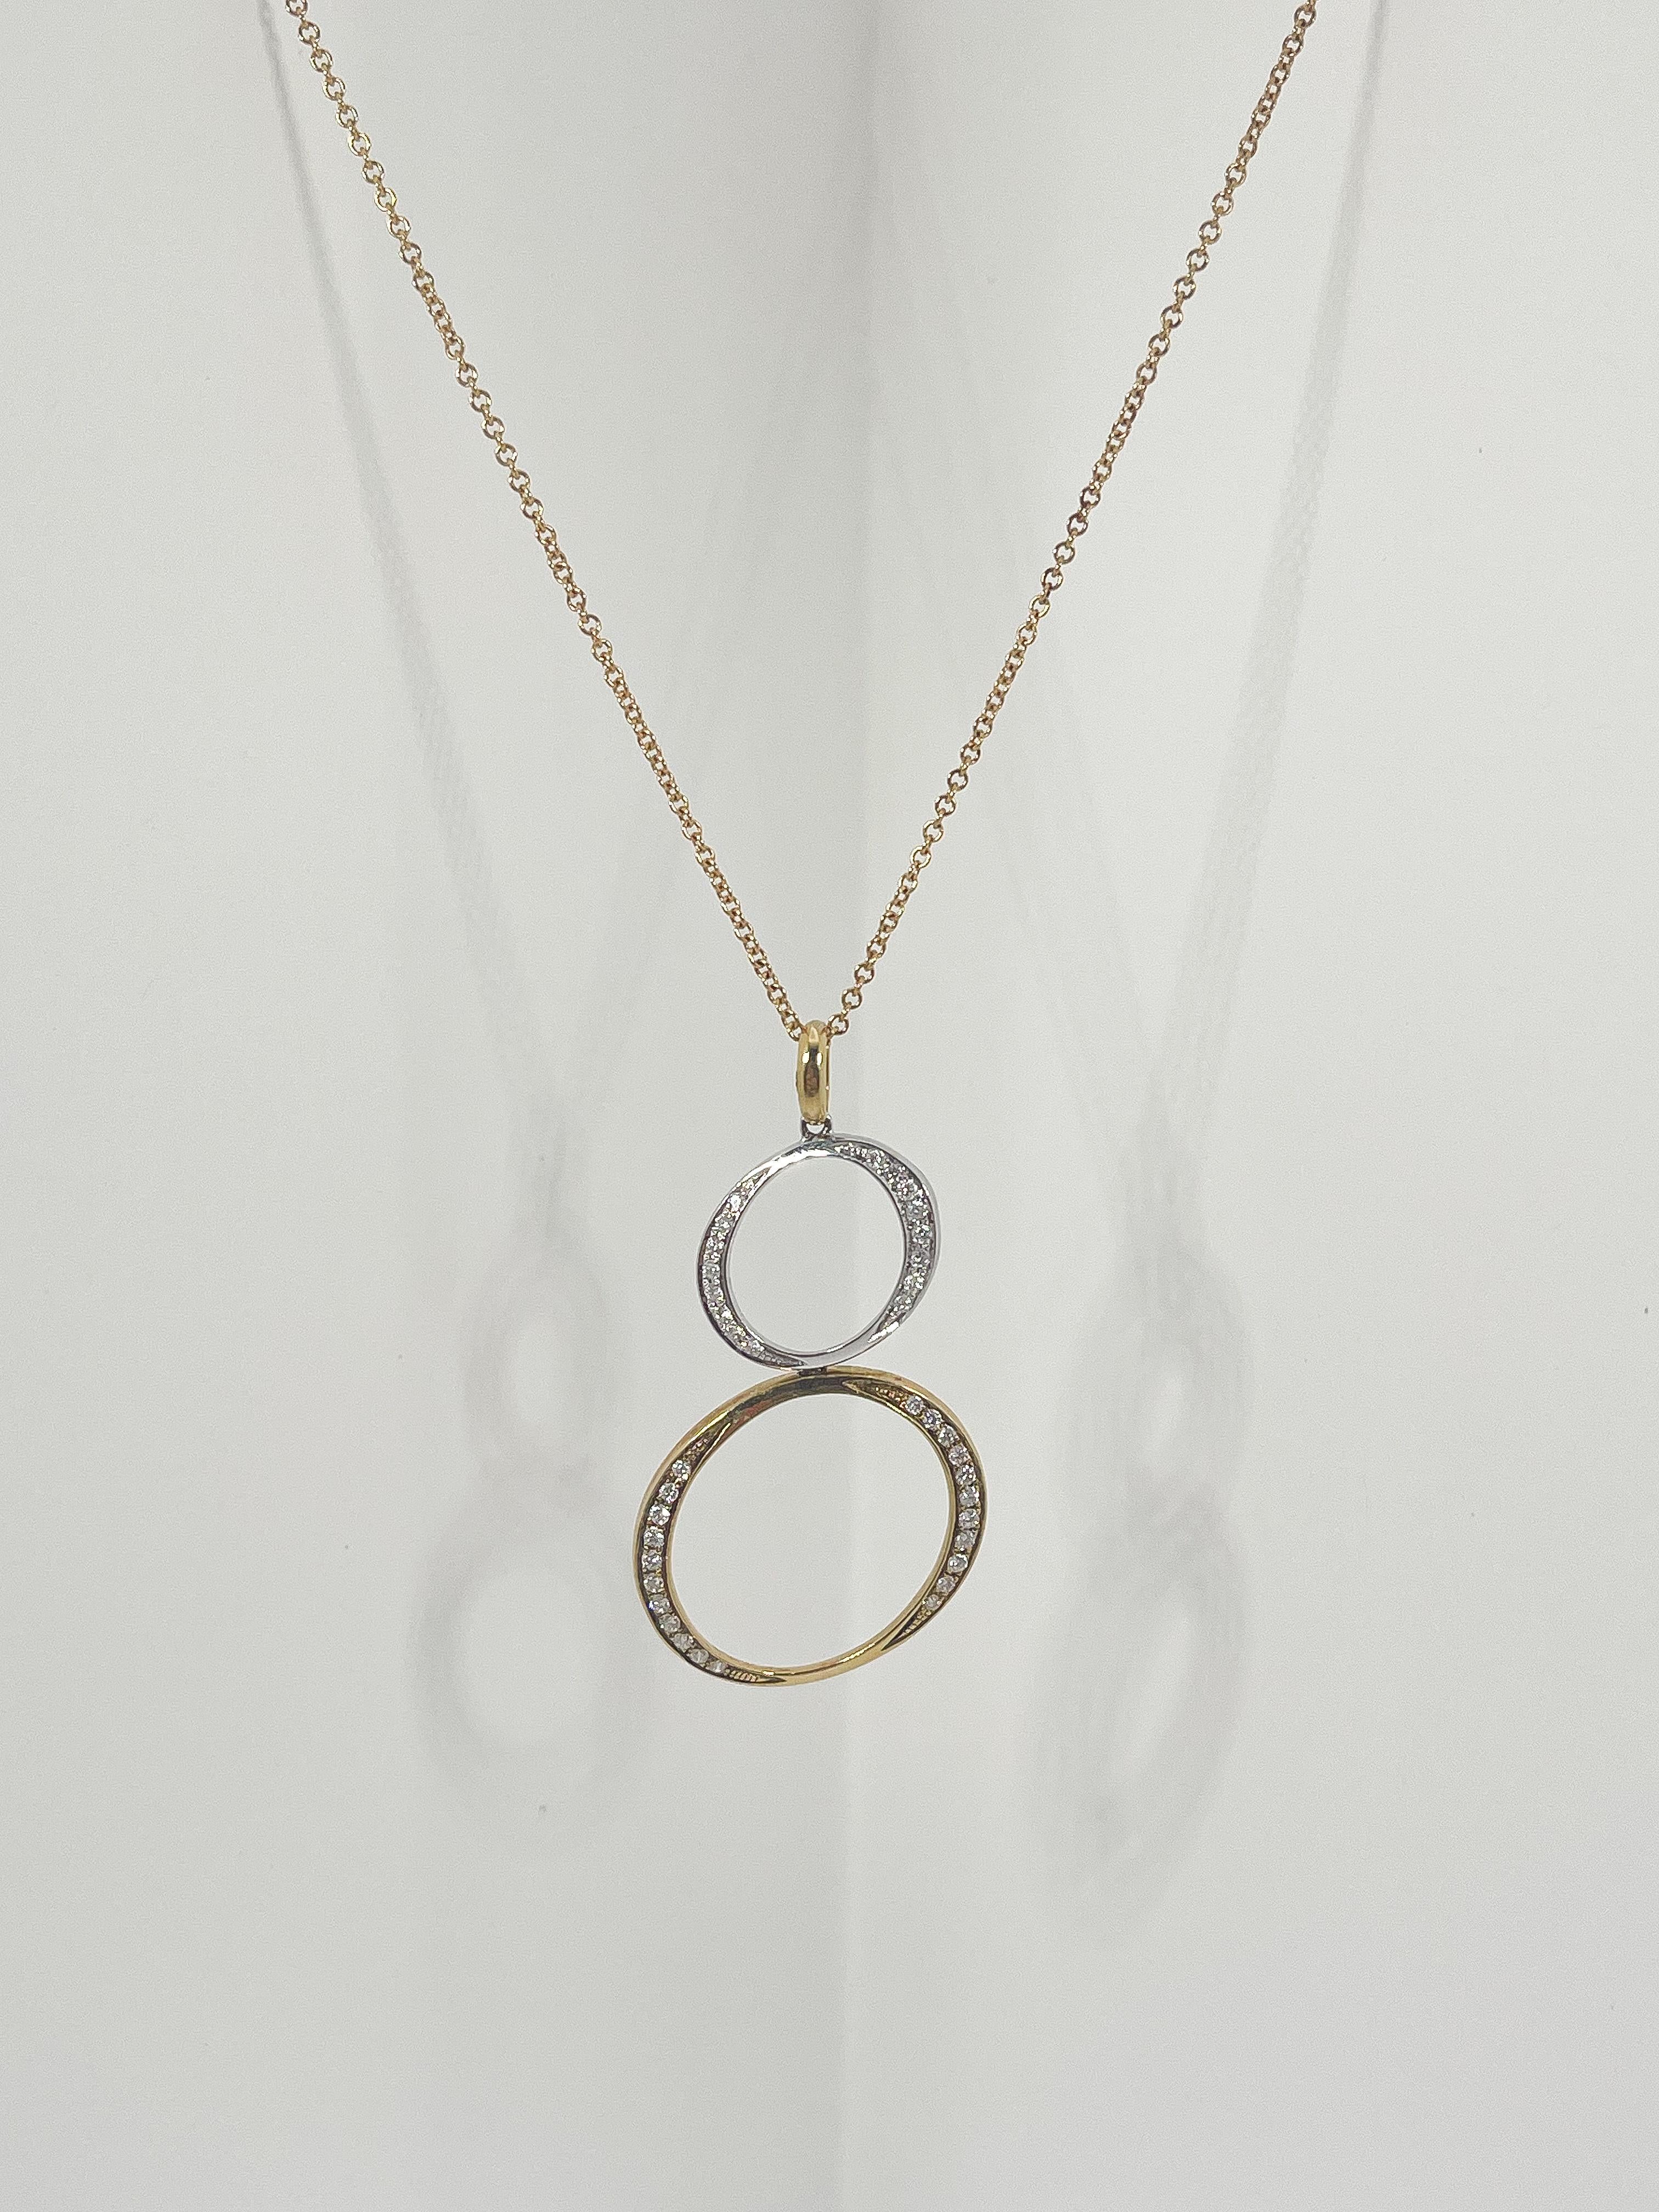 18k two toned diamond .30 CTW double circle pendant necklace. The chain and bail are both yellow gold, the top circle is white gold, and the bottom circle is yellow gold, both circles have diamonds on both sides of the circle. The necklace is 18